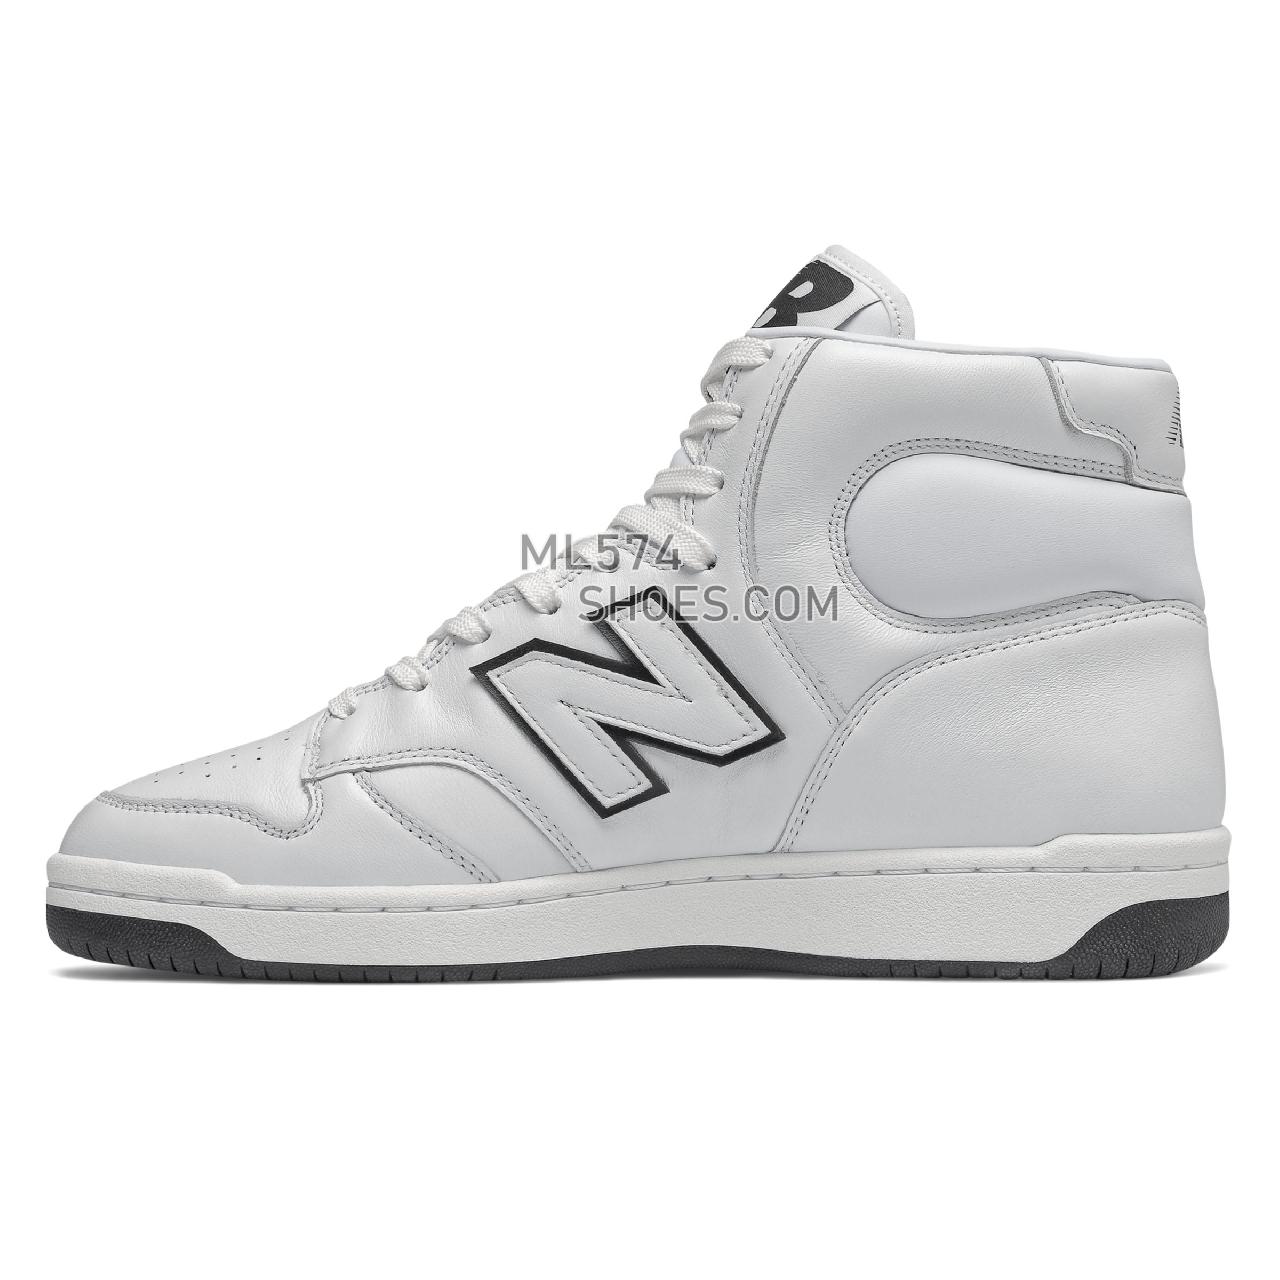 New Balance BB480 - Men's Sport Style Sneakers - White with Black - BB480HE